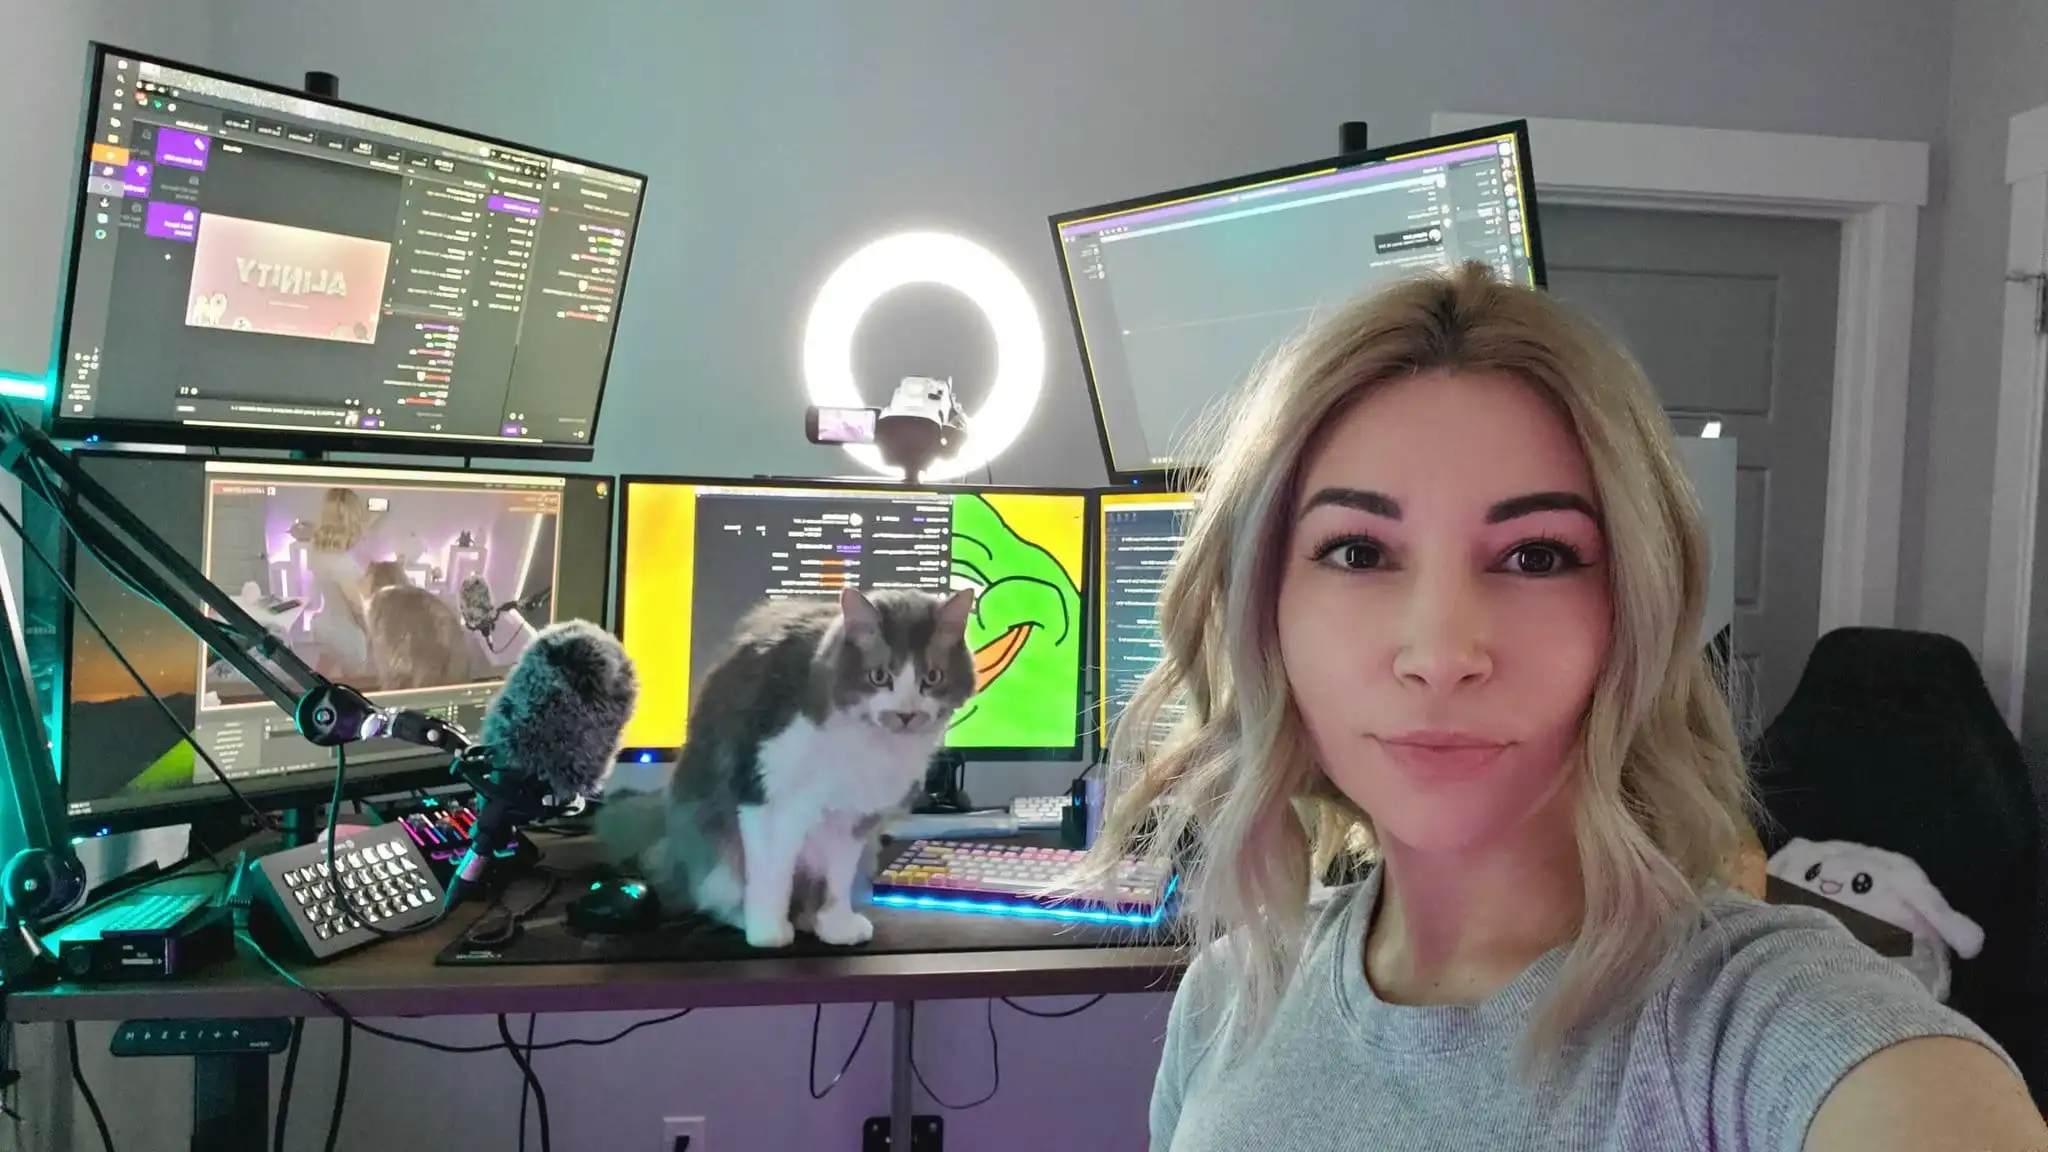 Alinity only fans